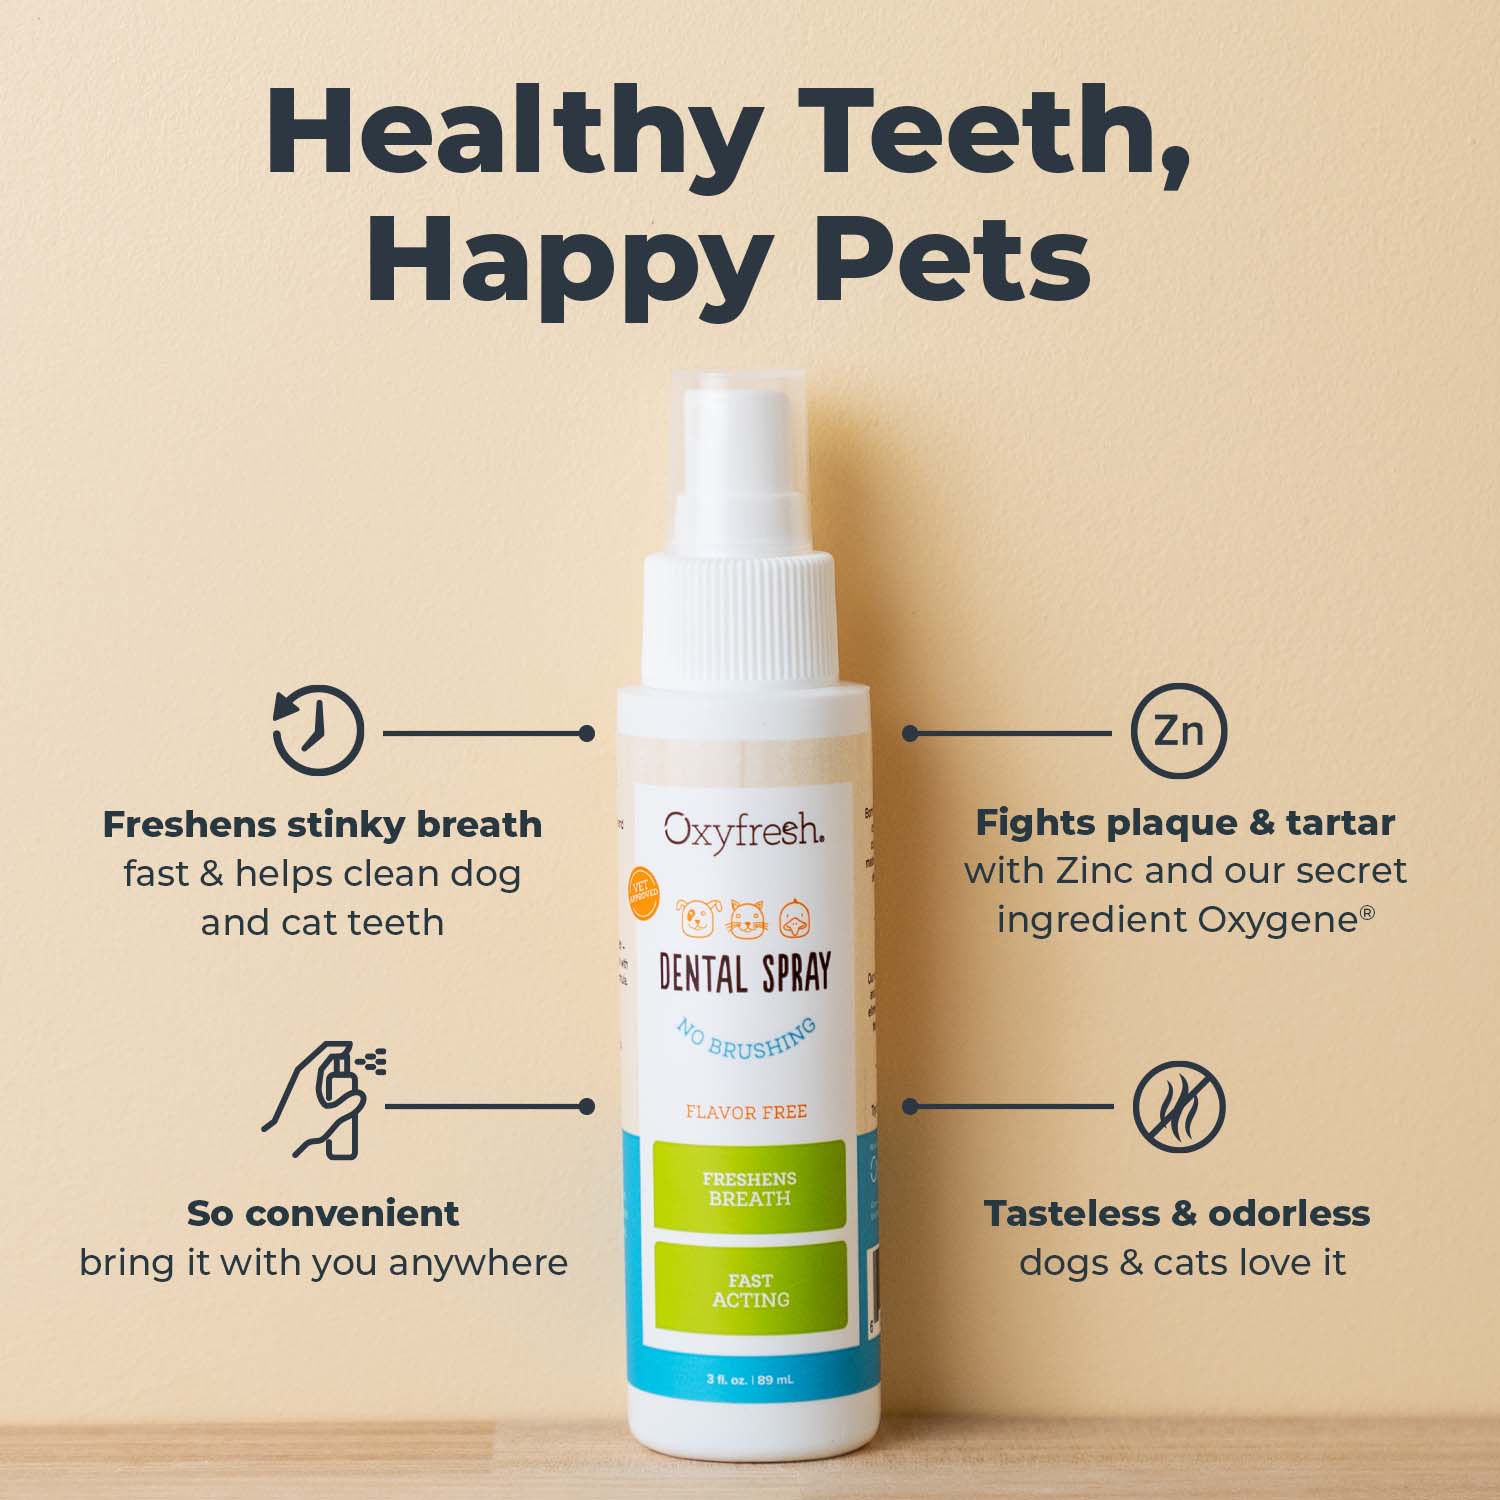 oxyfresh-cat-dog-breath-spray-dental-freshens-stinky-breath-fights-plaque-and-tartar-tasteless-and-odorless-and-convenient